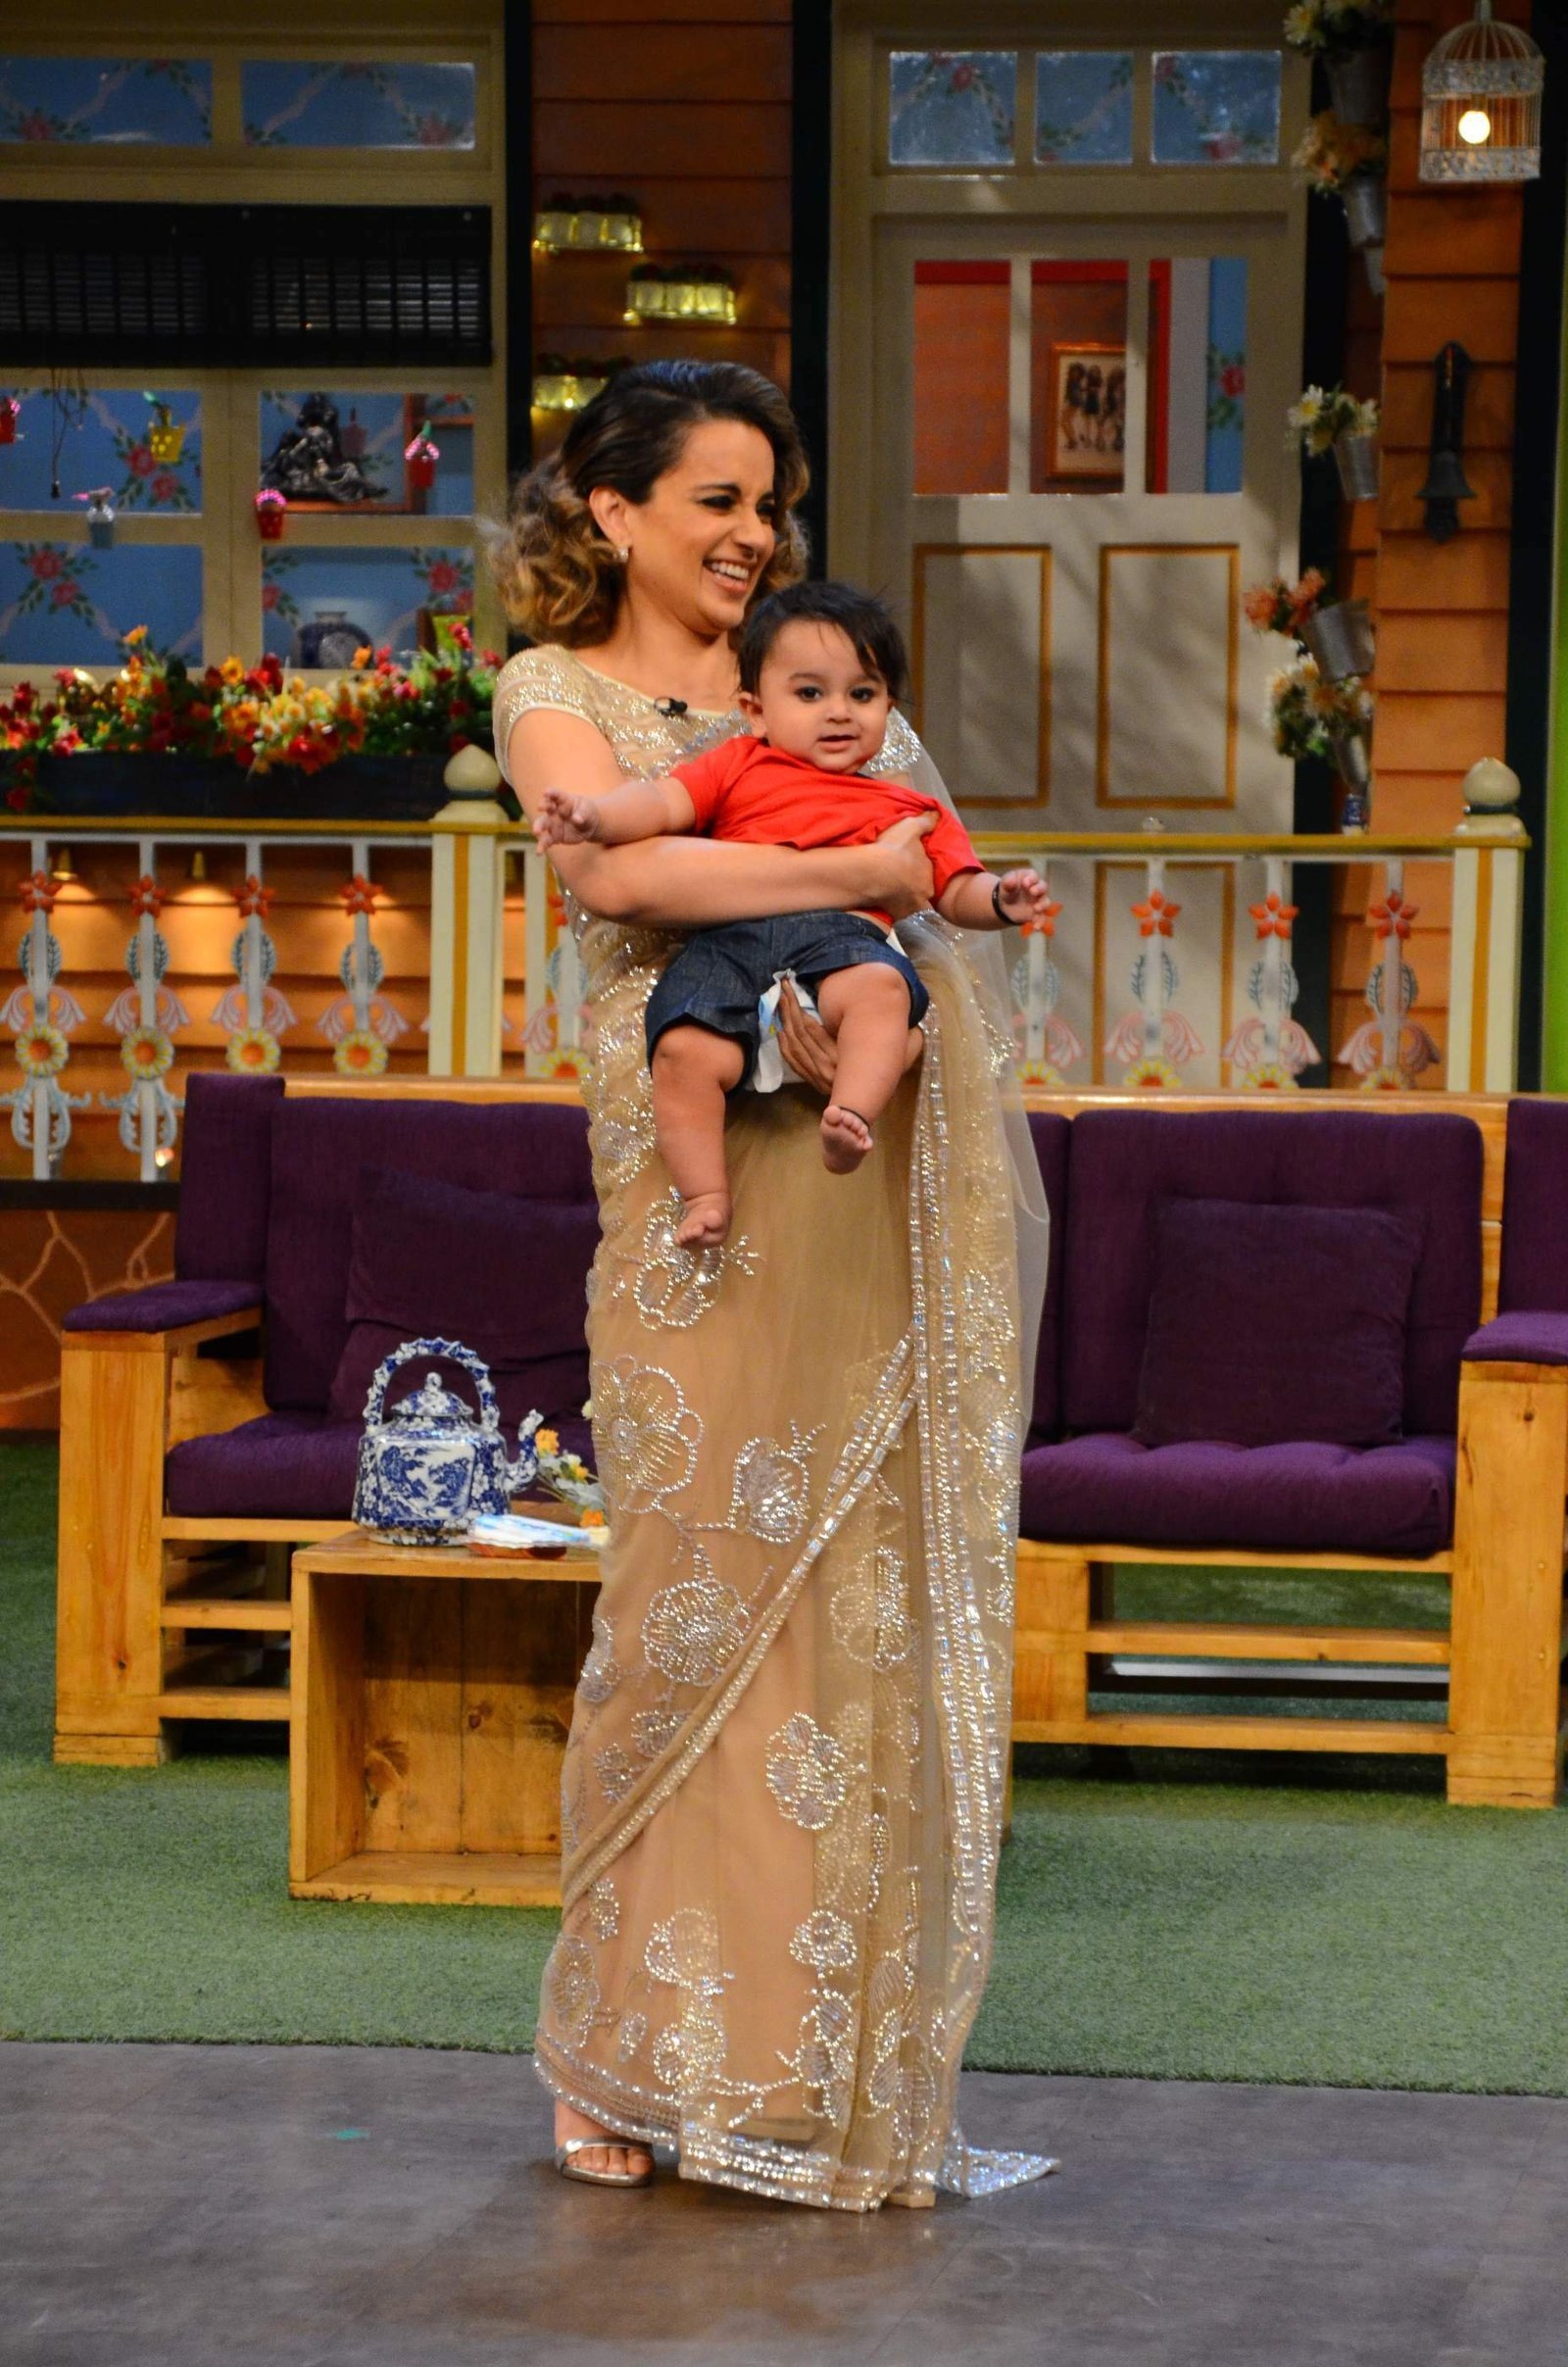 Kangana Ranaut - Promotion of film Rangoon on the sets of The Kapil Sharma Show Images | Picture 1471205